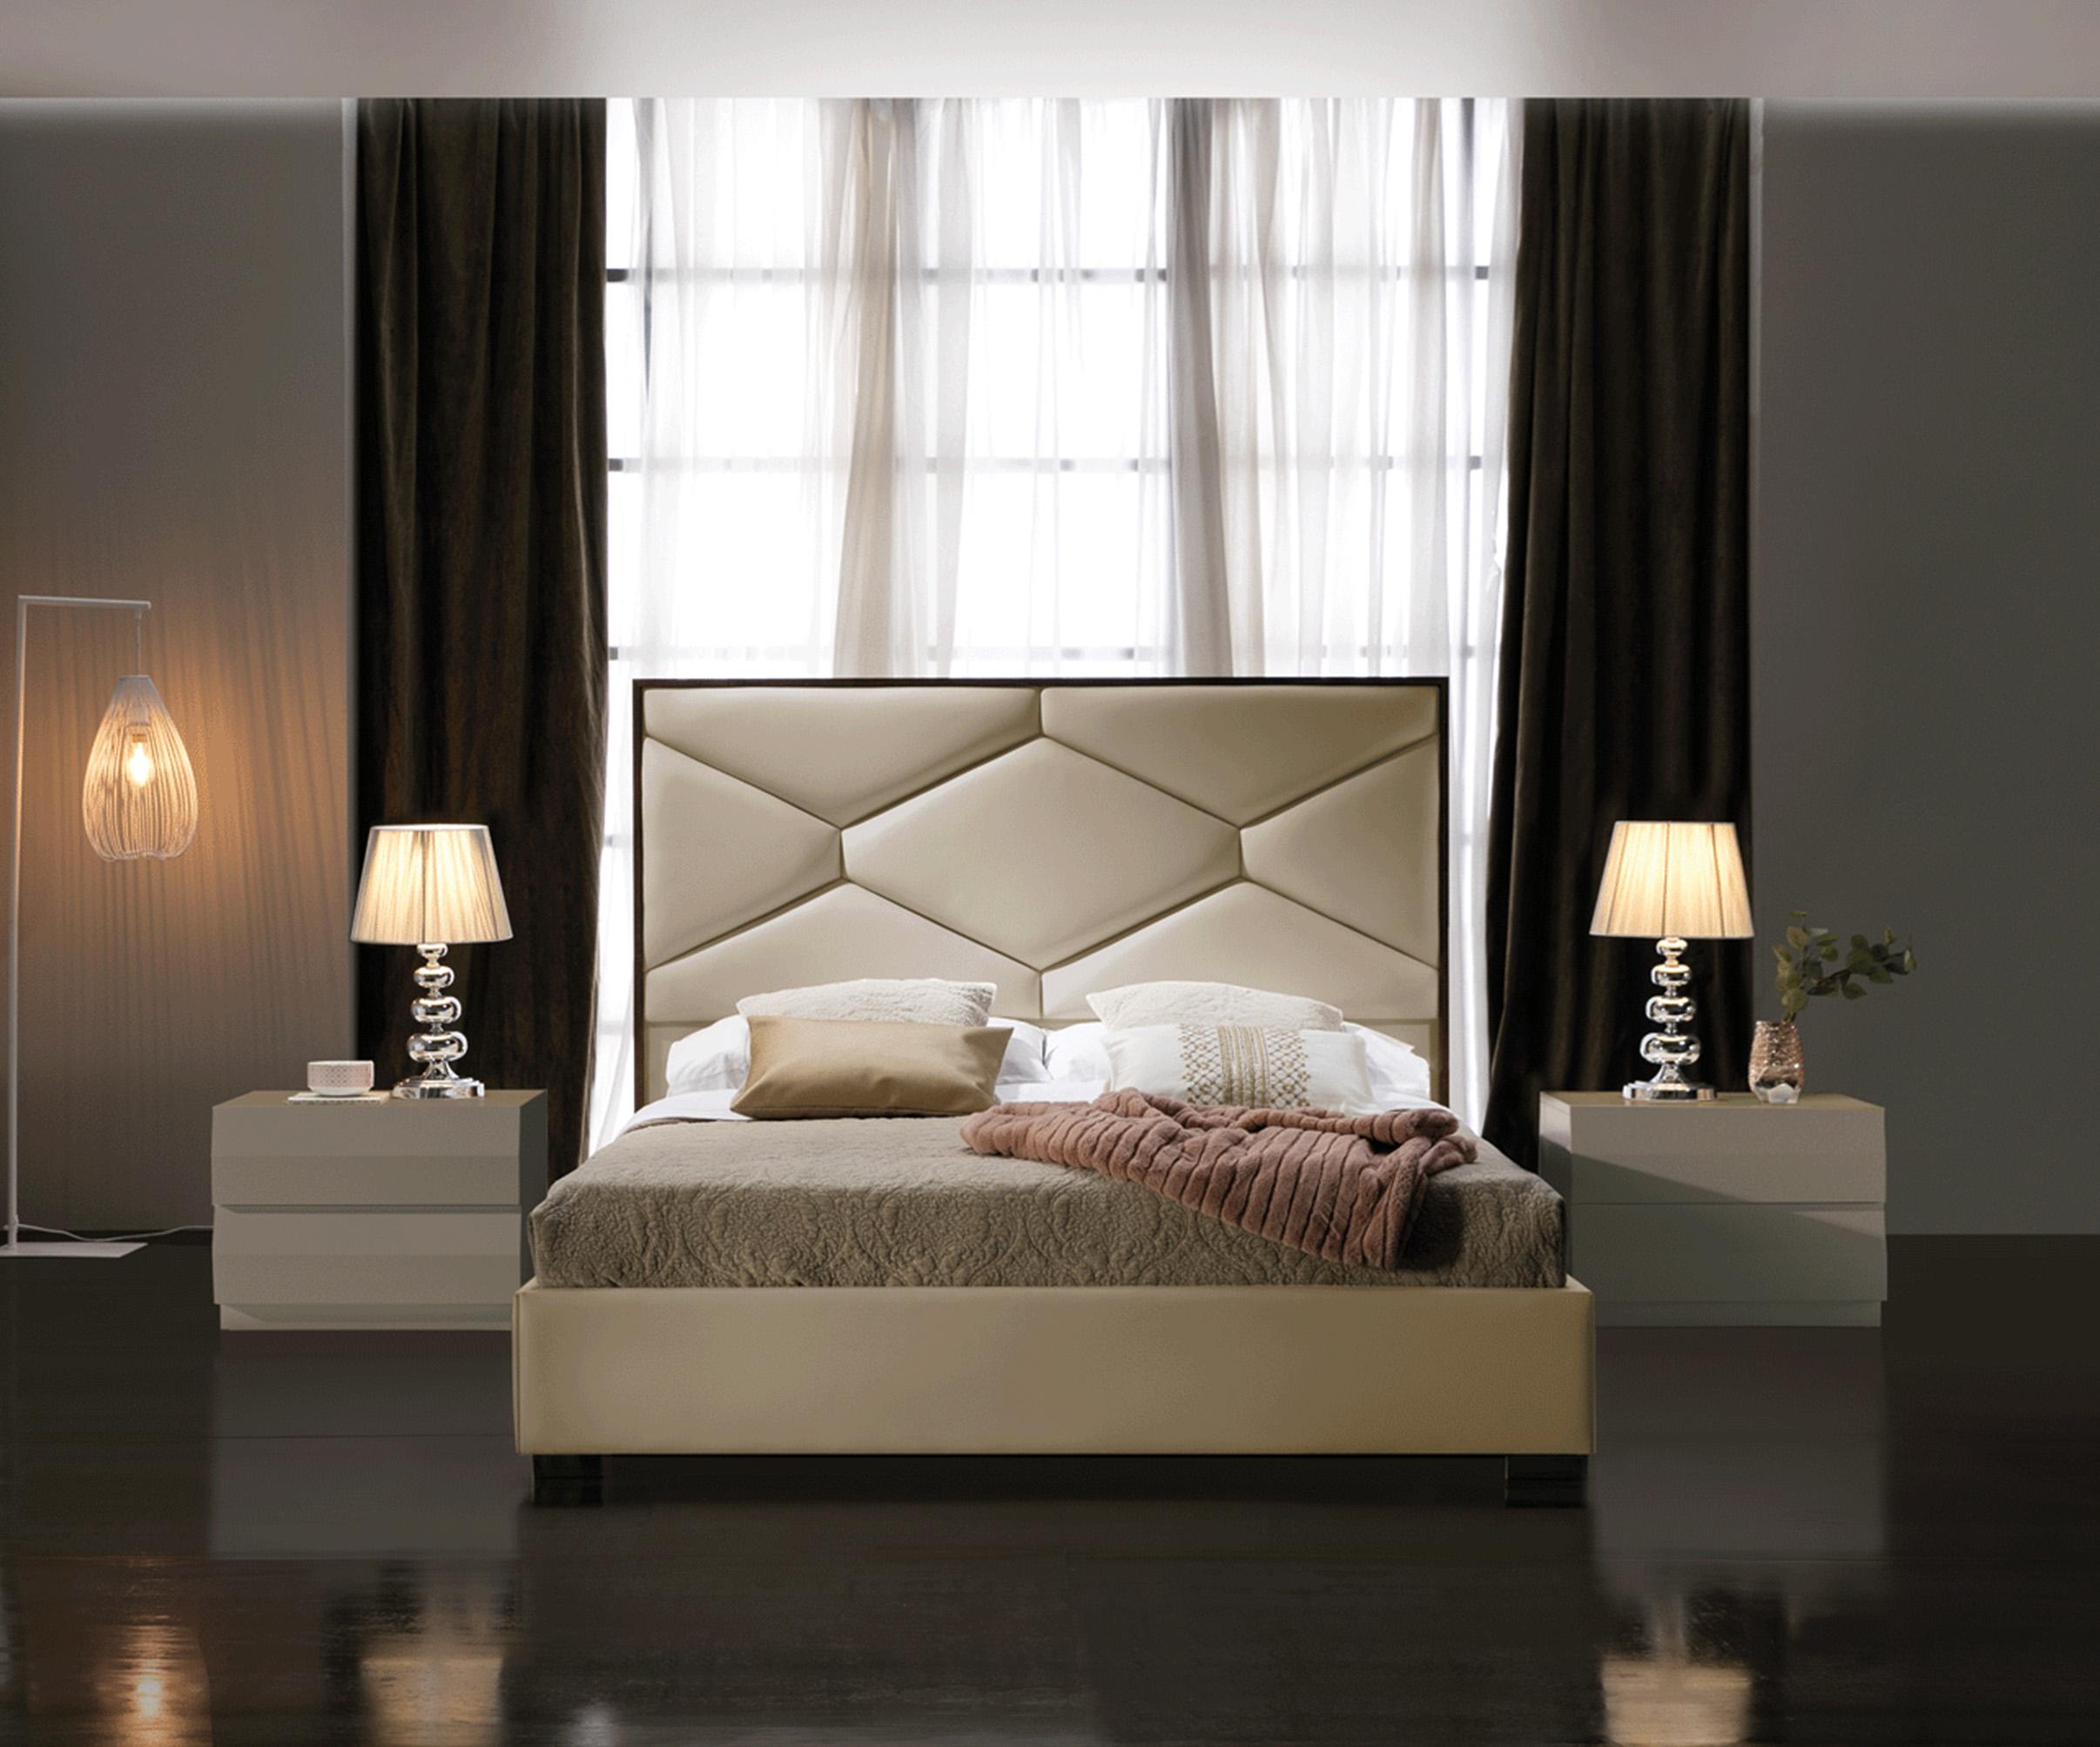 Contemporary, Modern Storage Bedroom Set MARTINABEDKS MARTINABEDKS-2N-3PC in Beige Eco-Leather